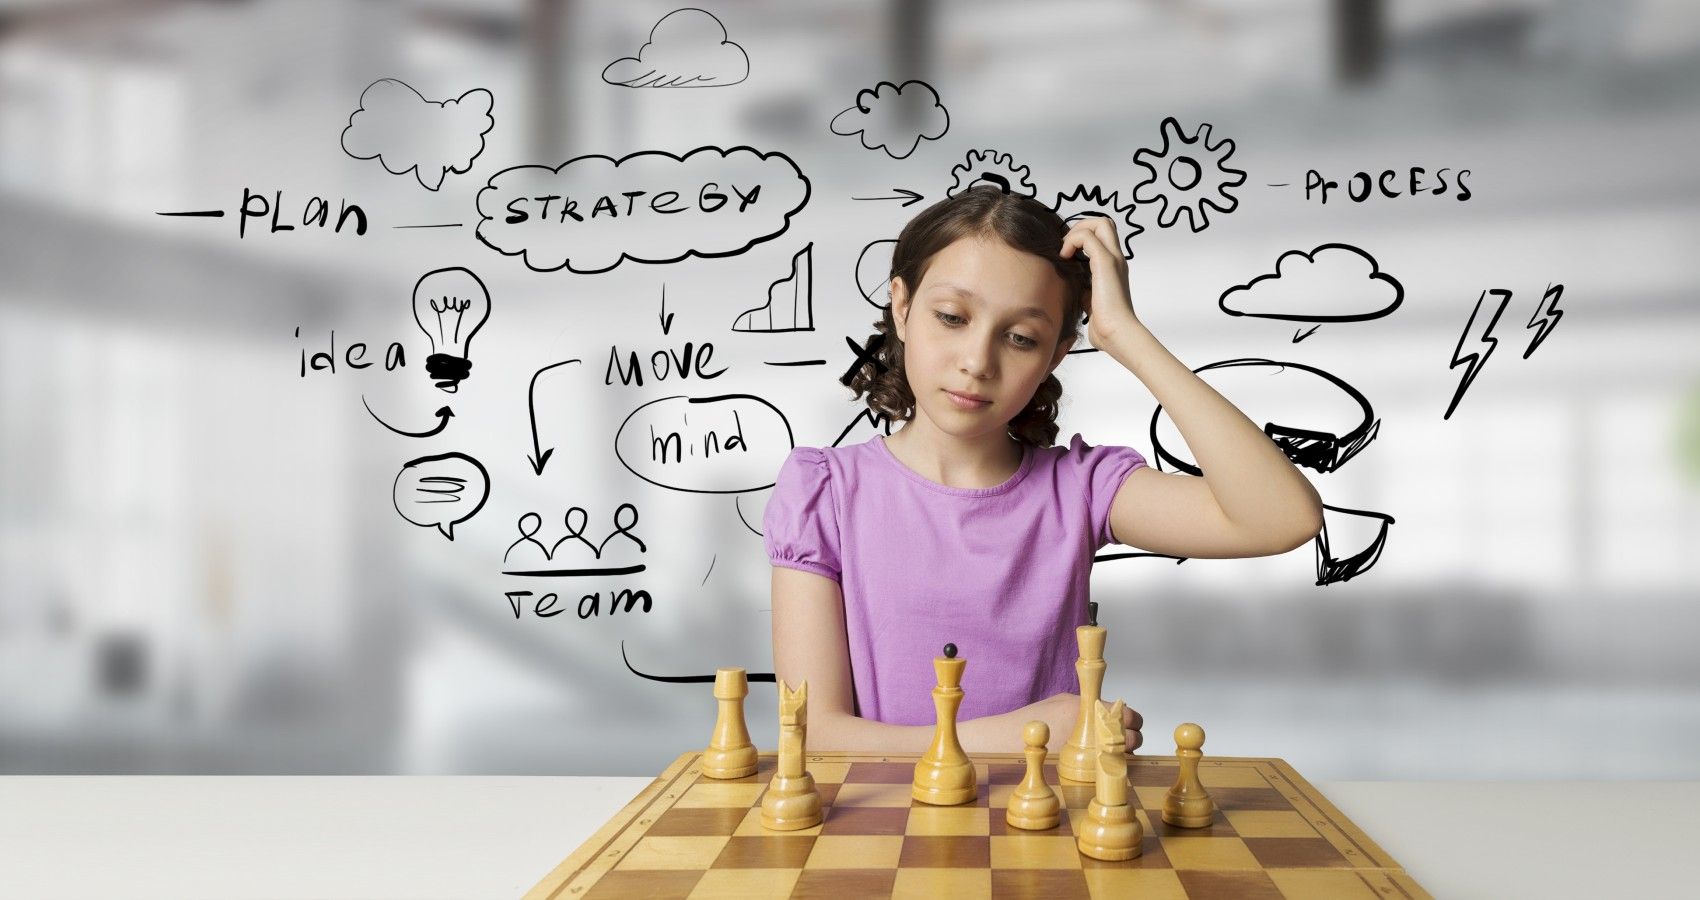 Kids Who Play Chess Experience Decrease In Risk Aversion